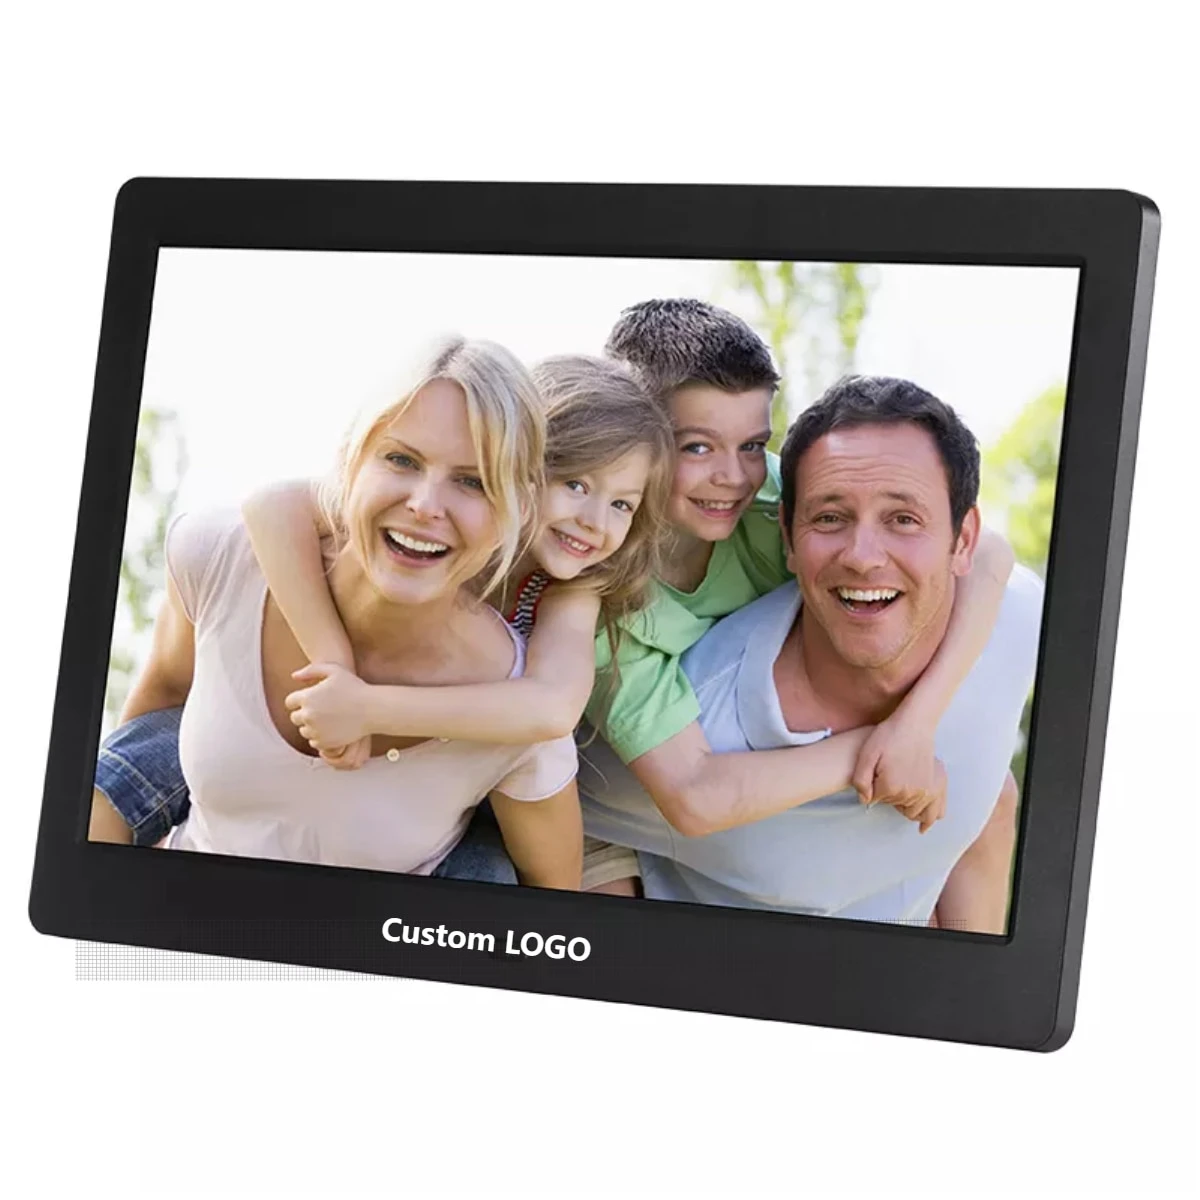 1920*1200 IPS touch screen 10 inch digital photo frame Wifi support free application sharing photos